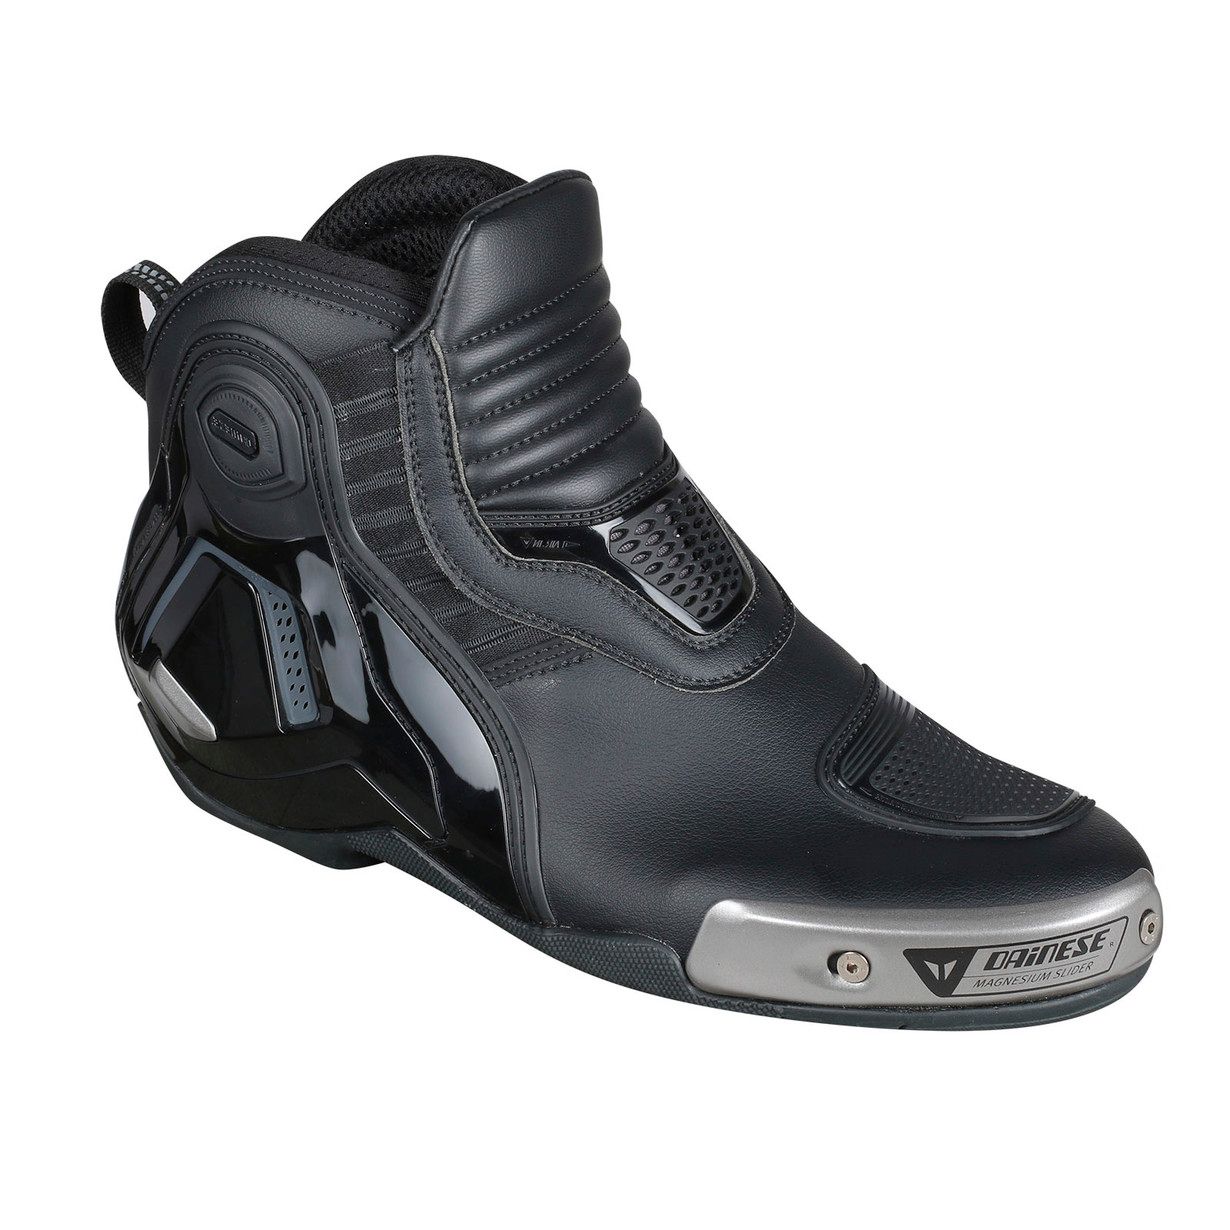 Dainese Dyno Pro D1 Boot Black Anthracite